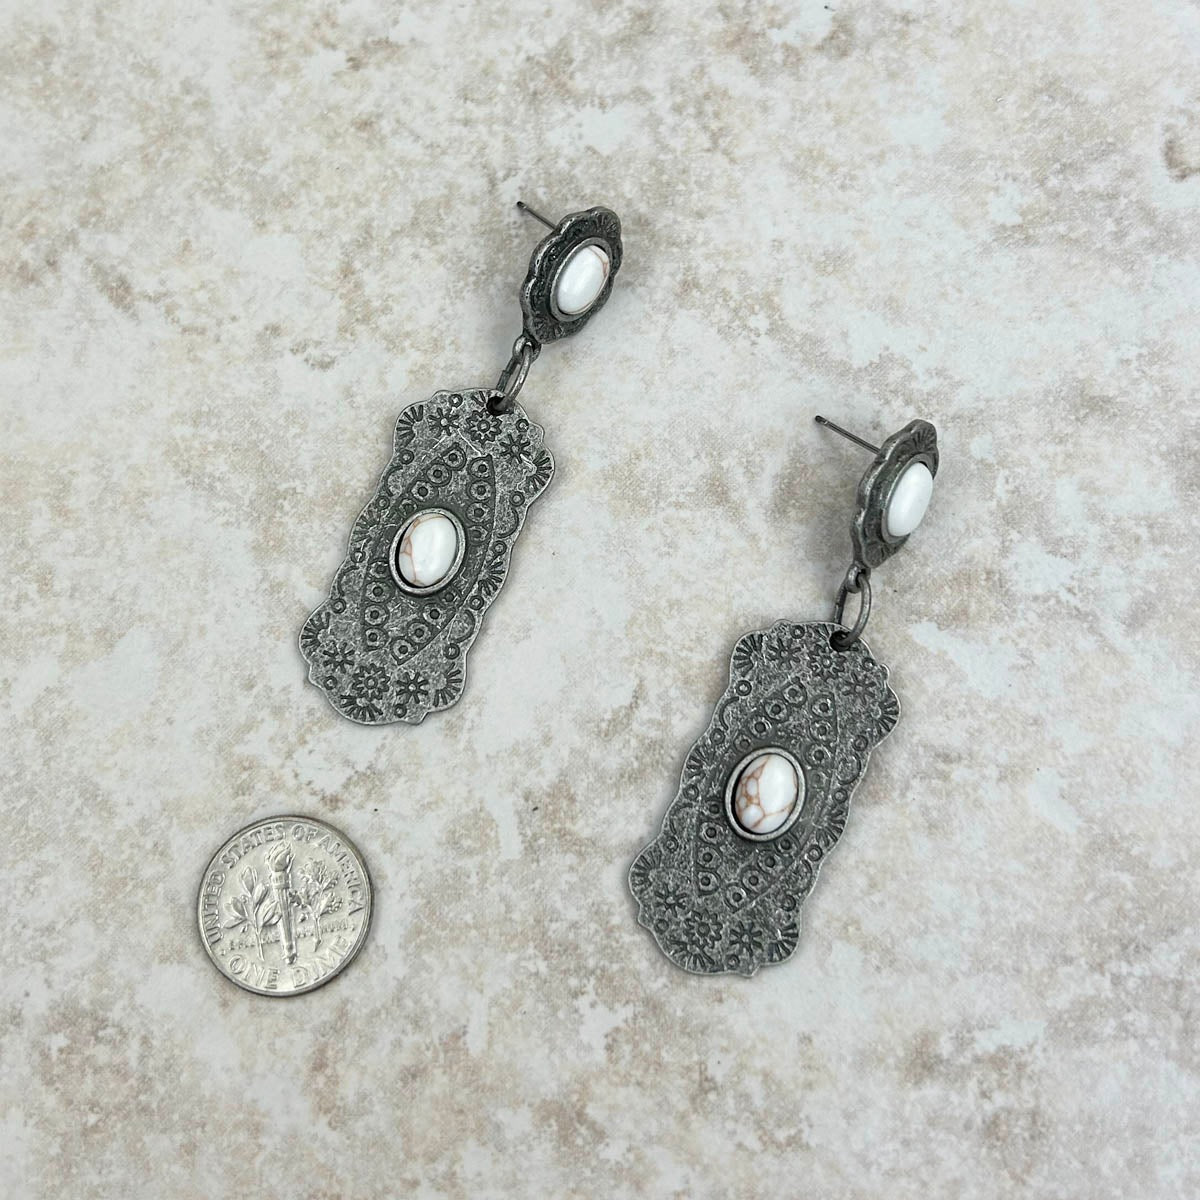 Silver metal with red stone Earrings